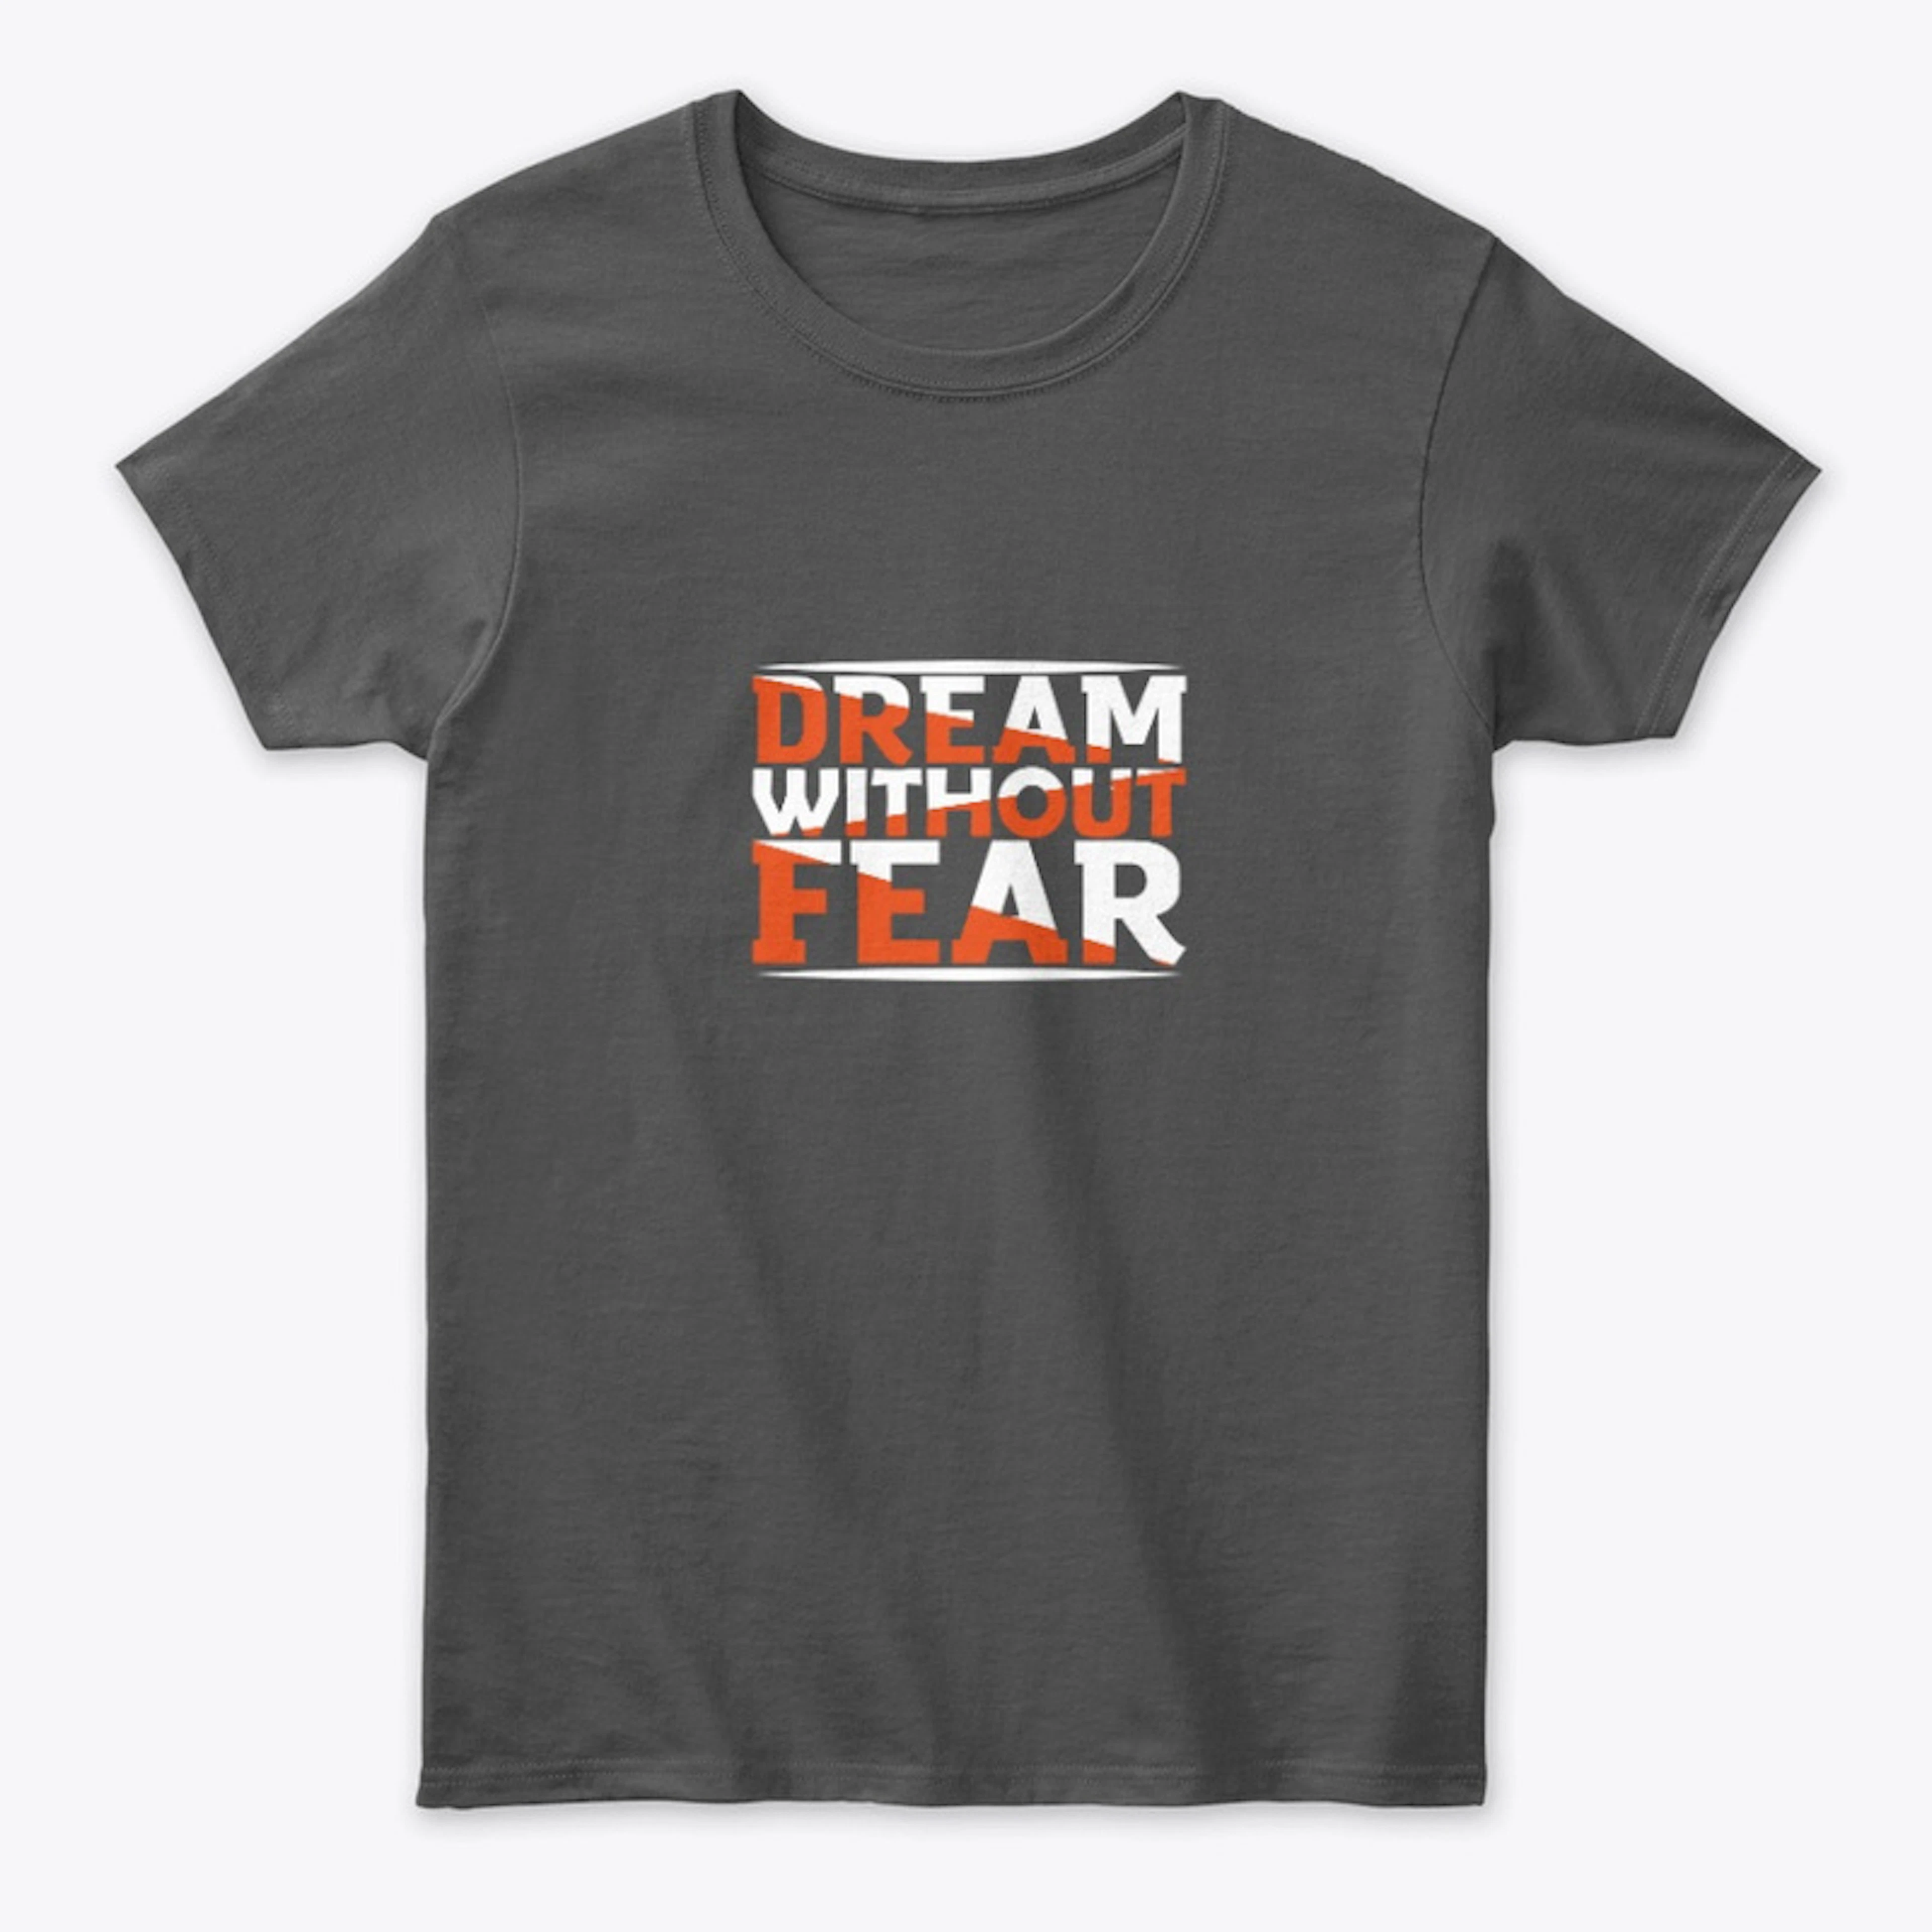 Dream without fear tee